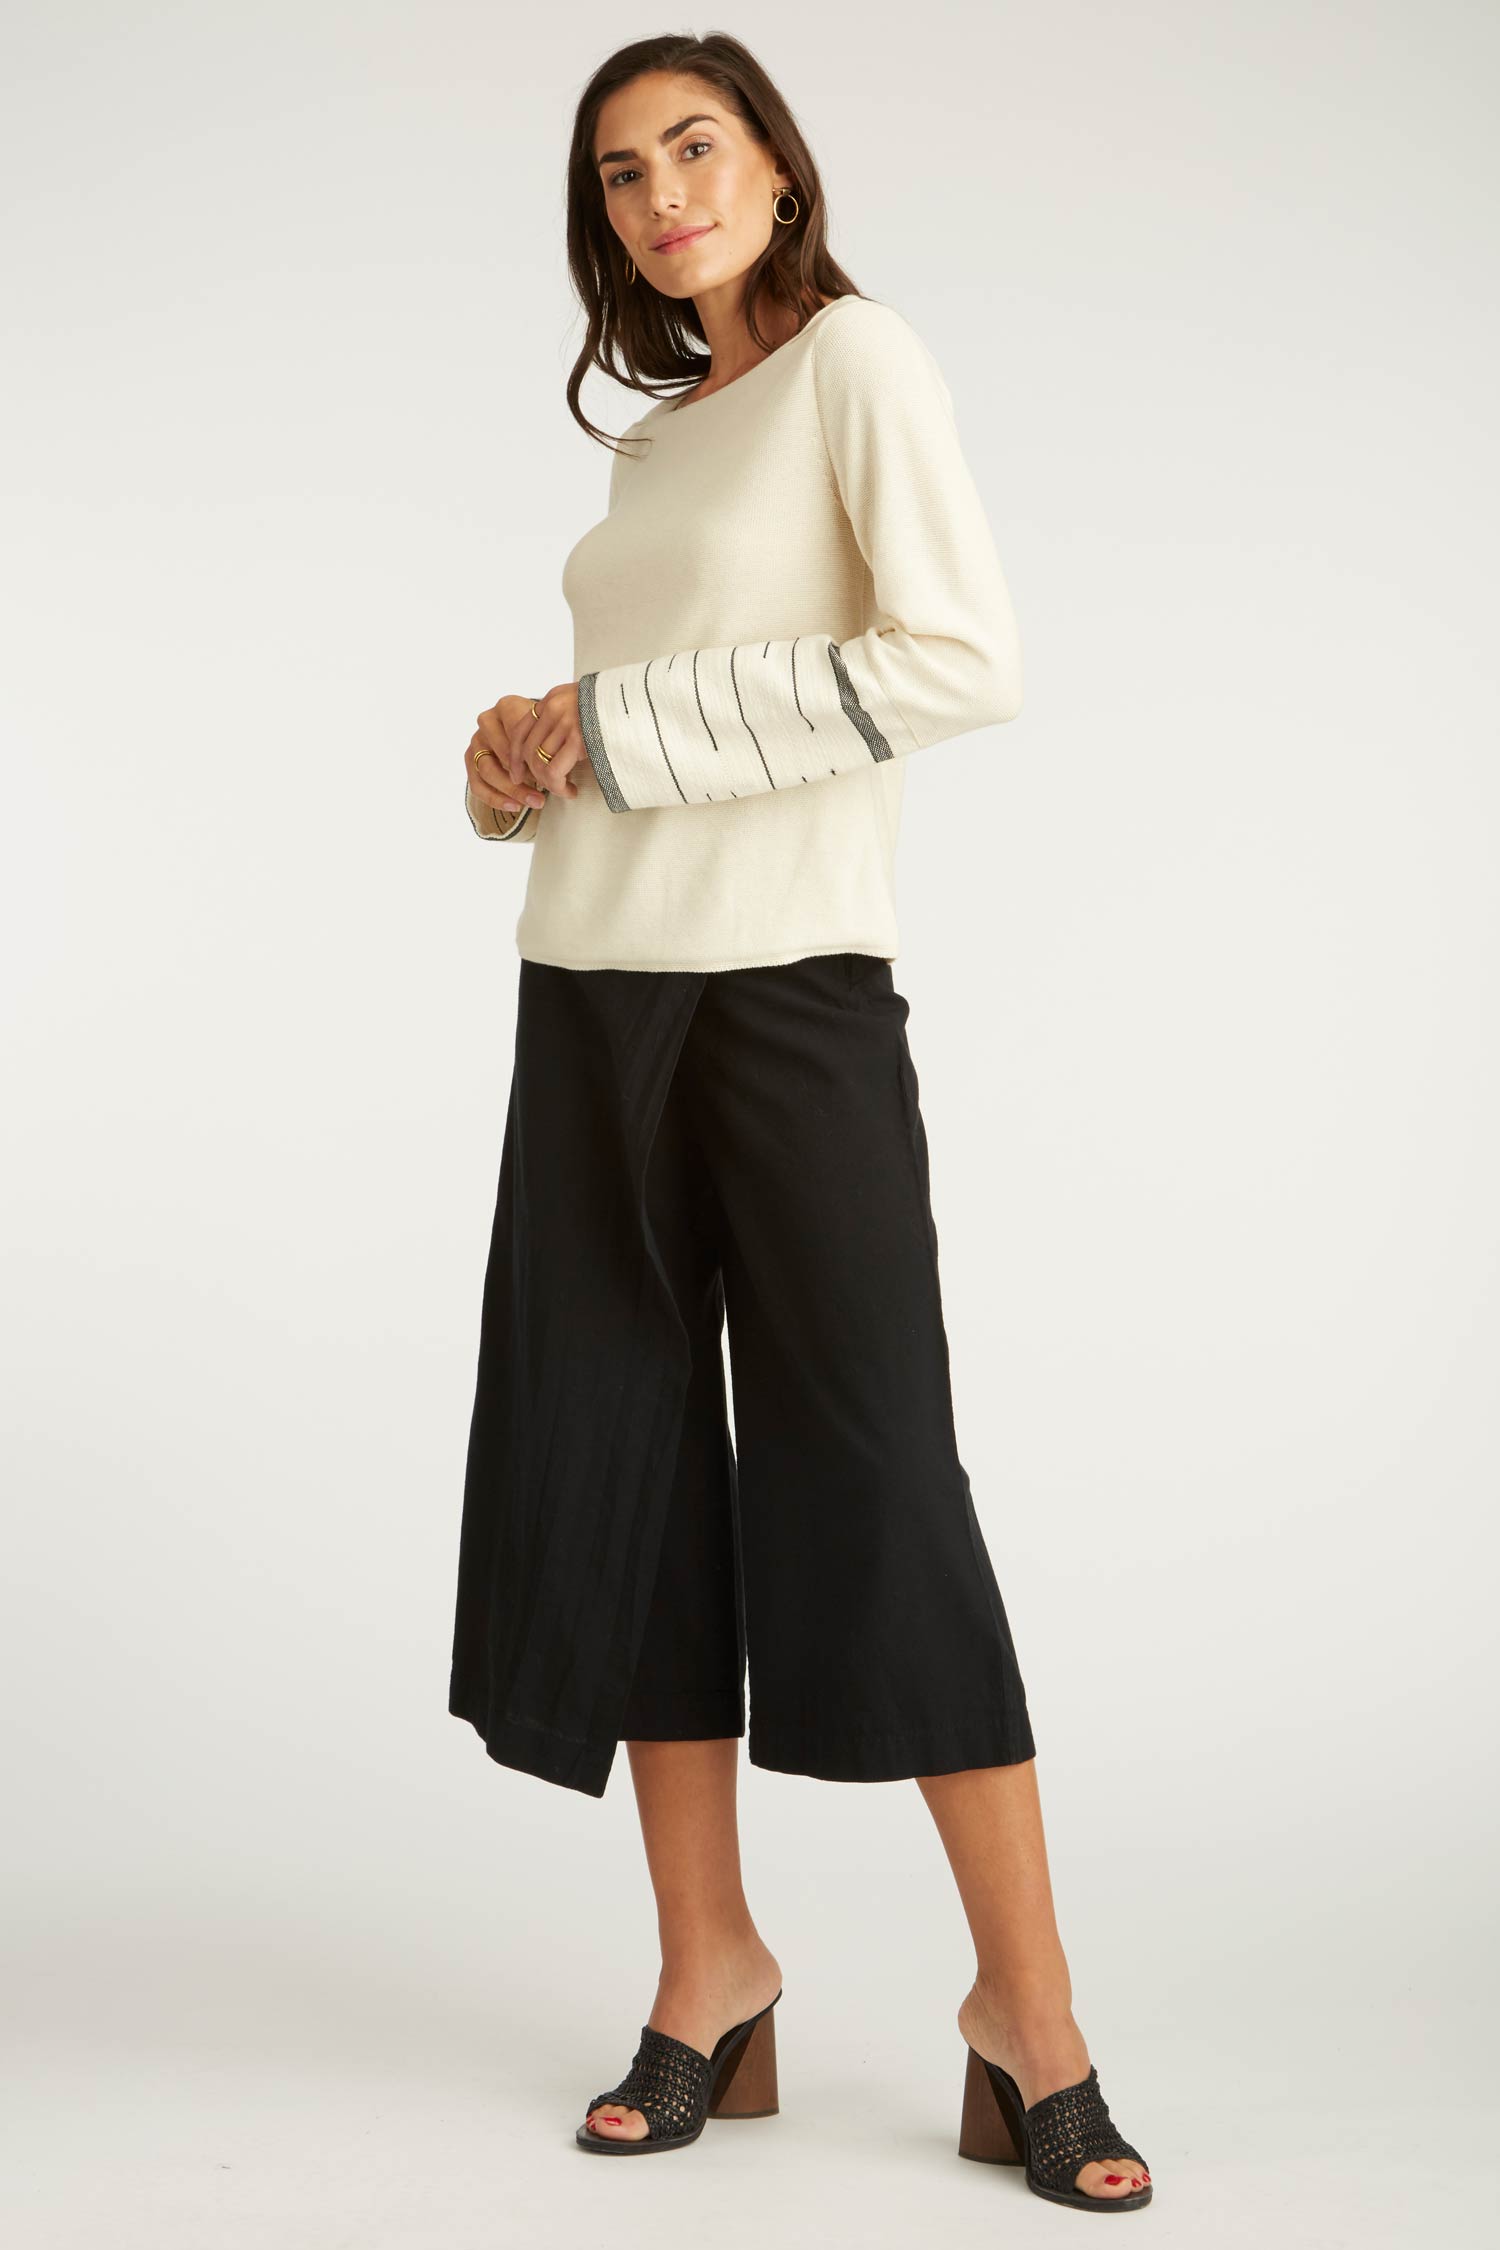 Womens Organic Cotton Clothing | Woven and Knit Sweater | Black Woven Pants